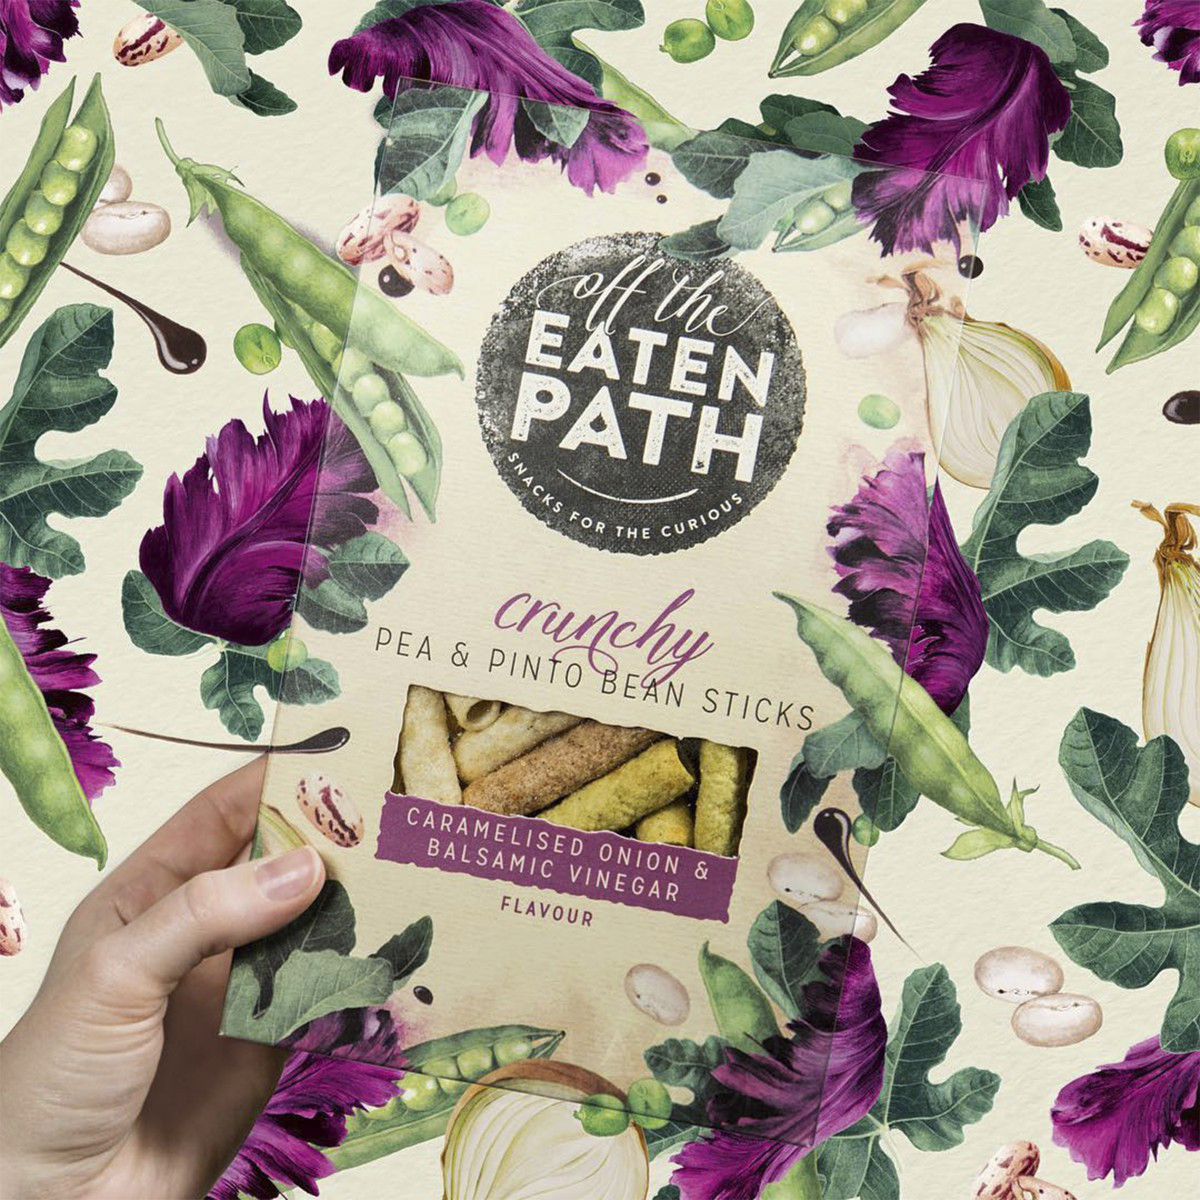 Off the Eaten Path (UK) Savory Snack by PepsiCo Design & Innovation